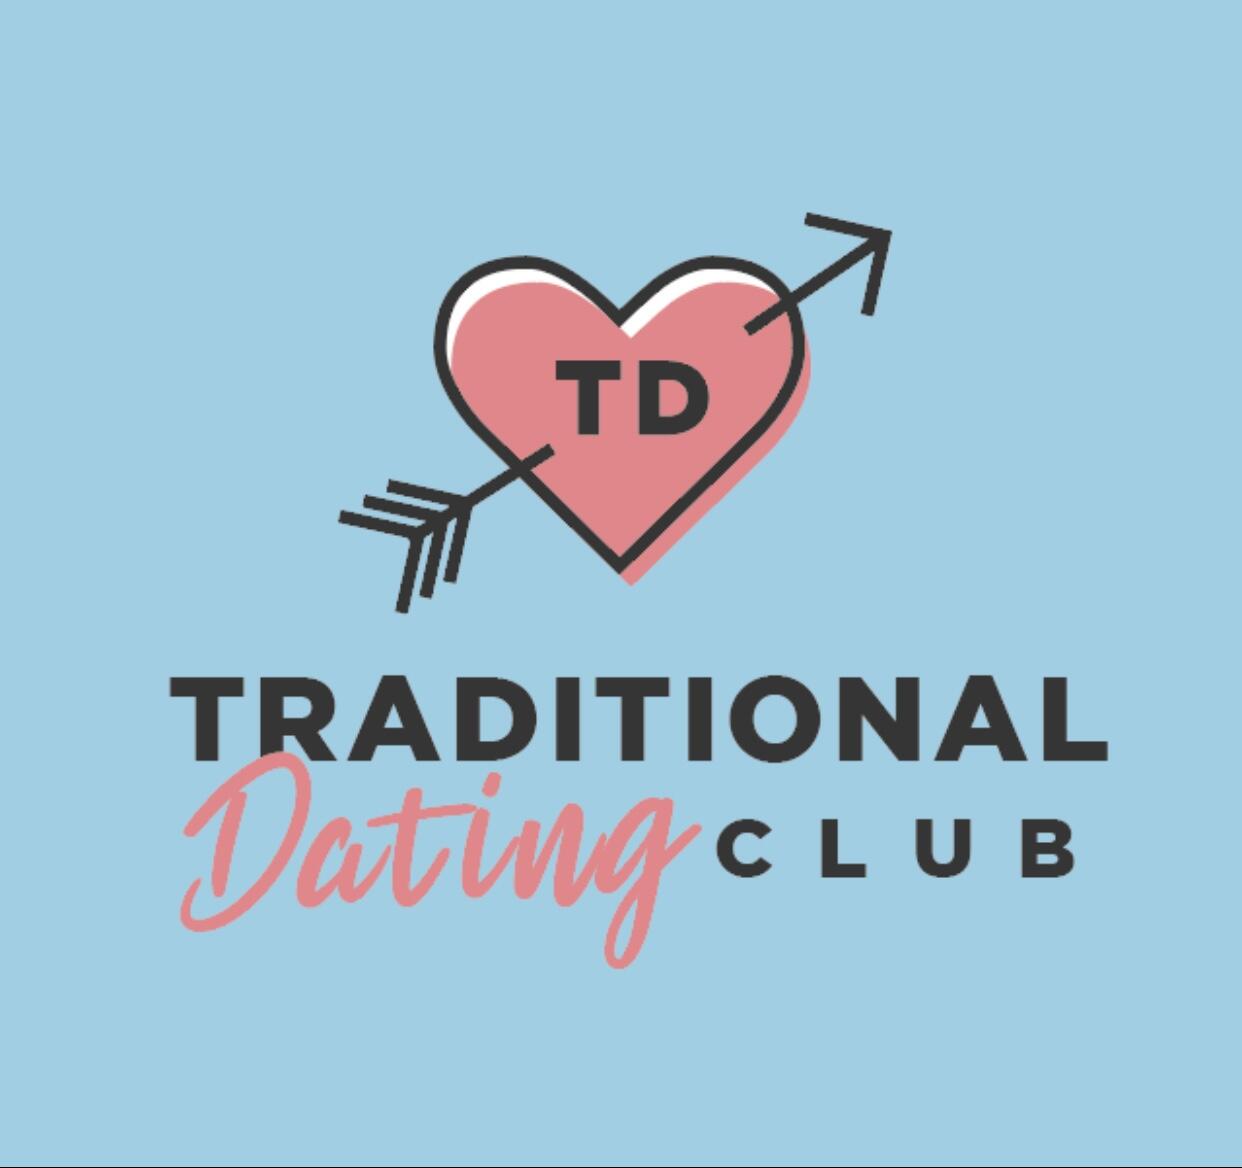 los angeles dating clubs open 2021